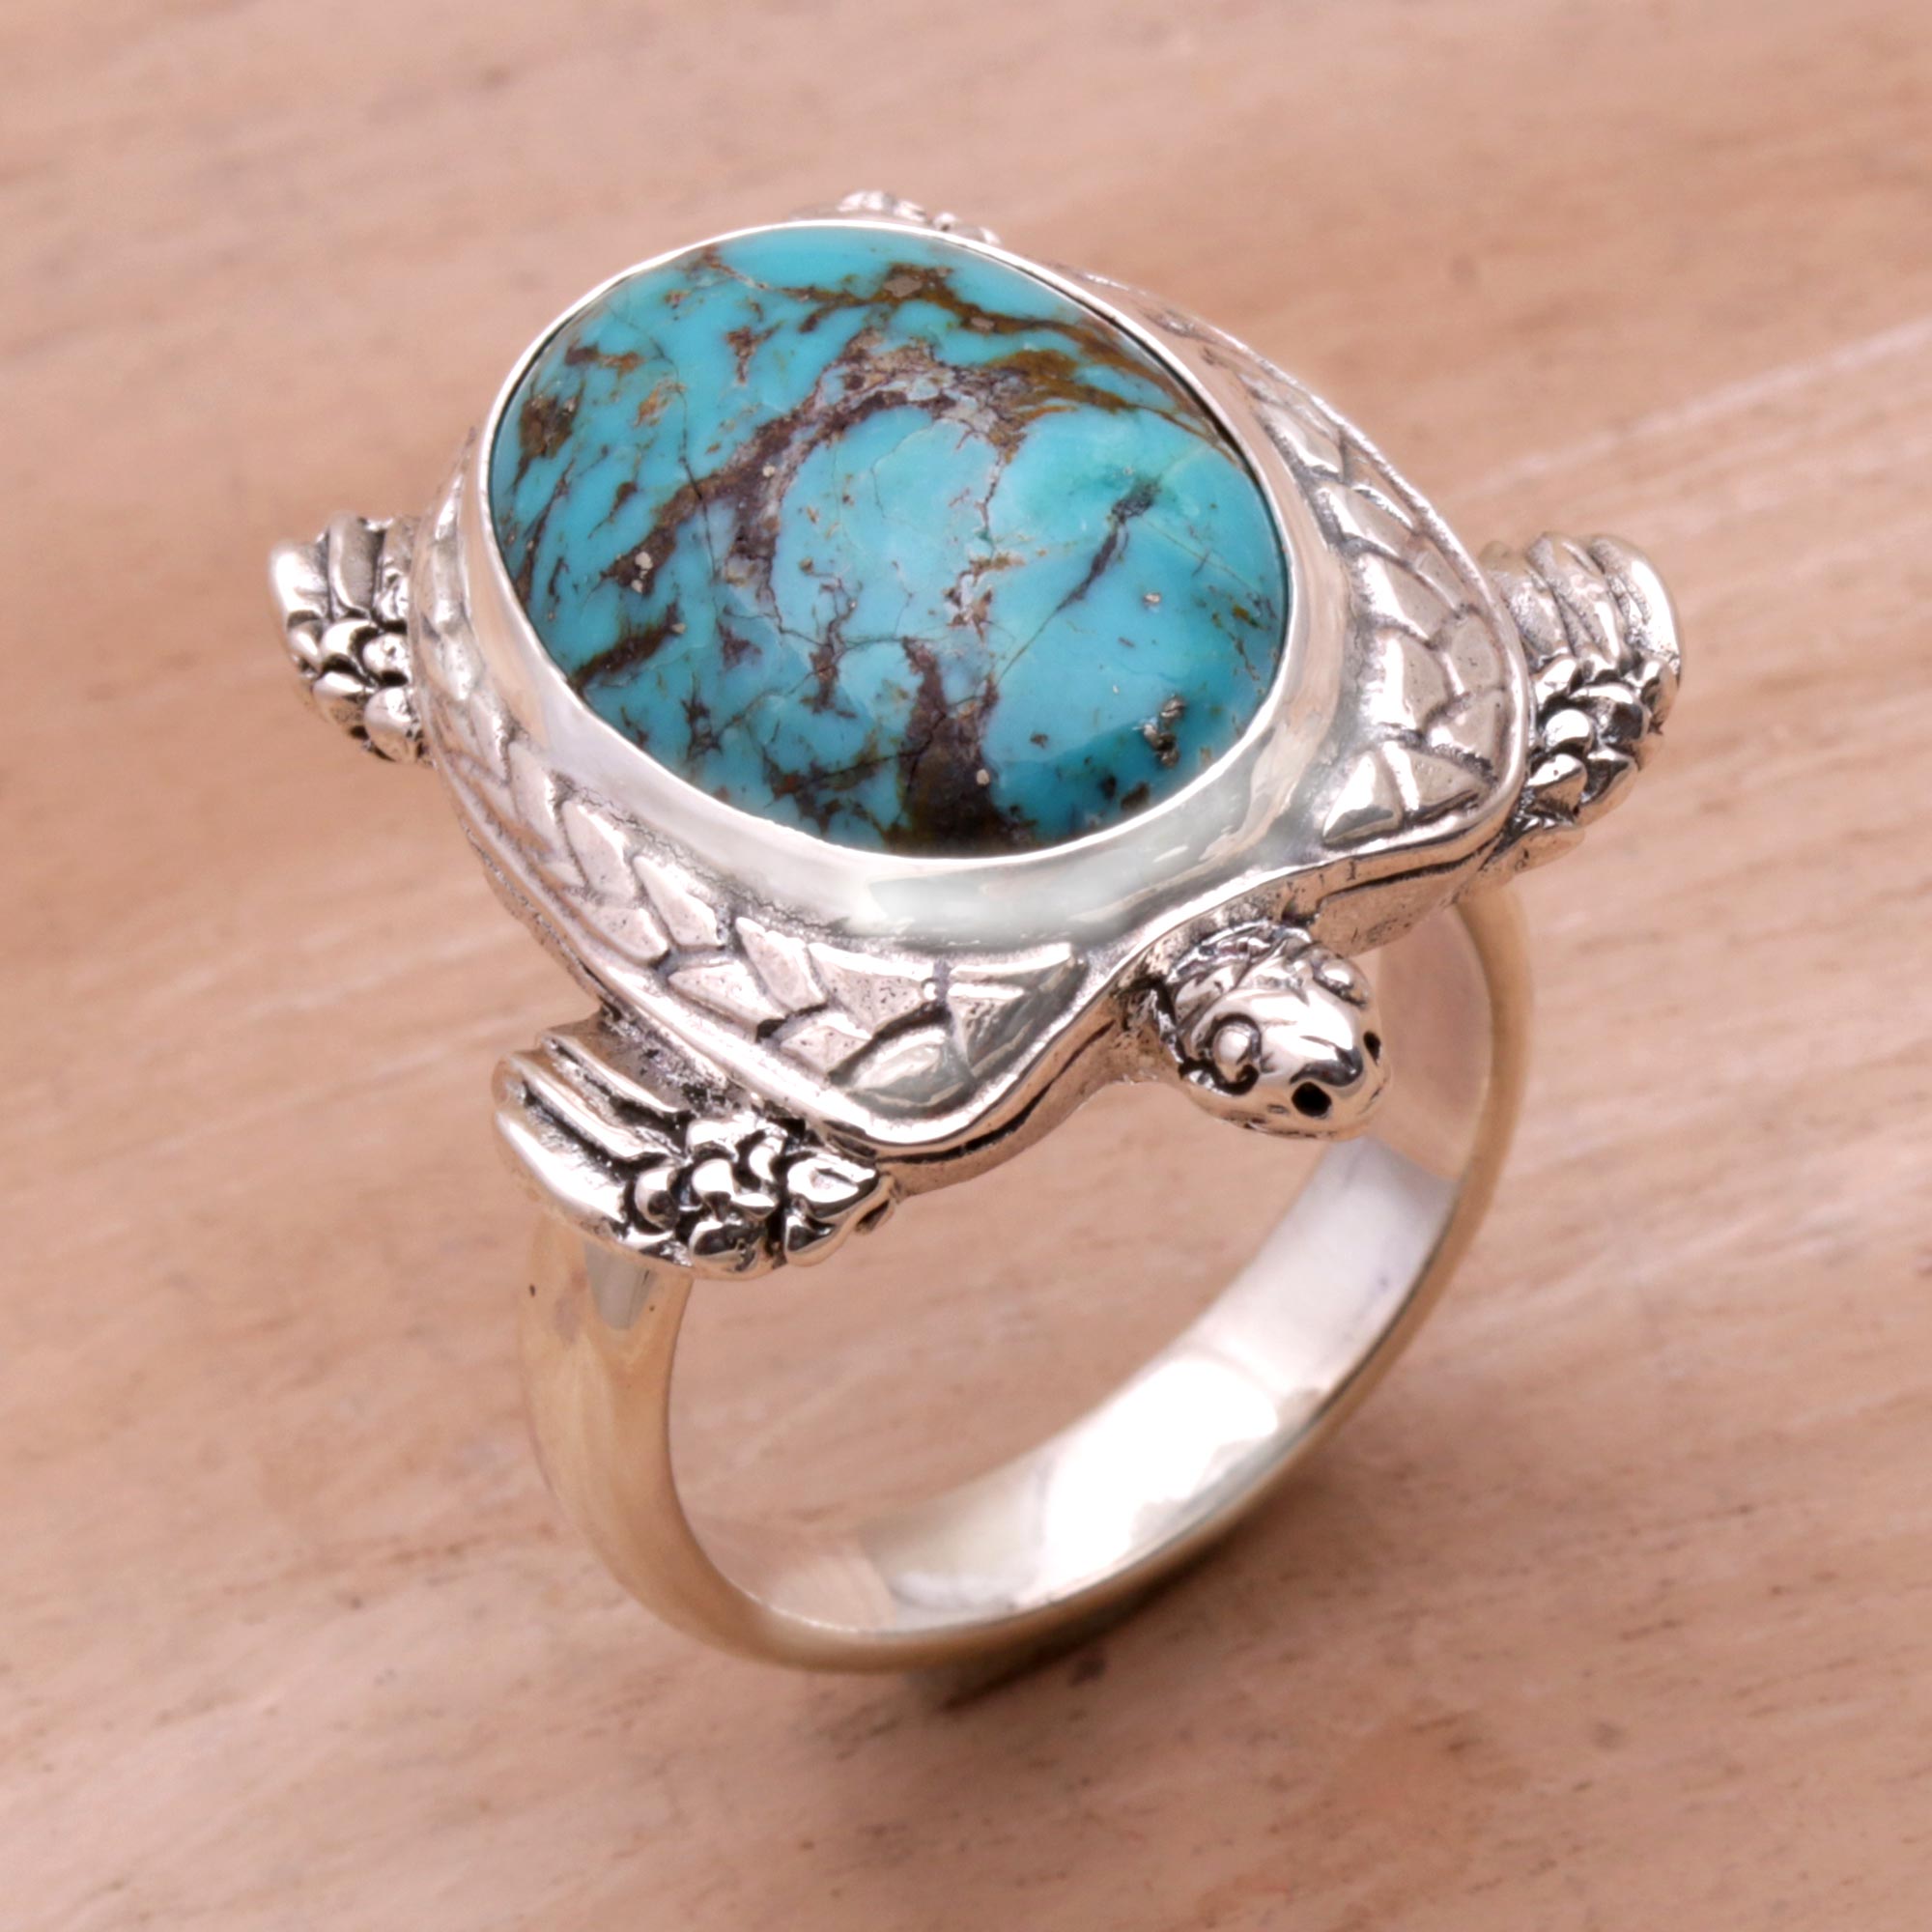 NOVICA Chelonia Turtle Men's Sterling Silver And Reconstituted Turquoise Ring - 6